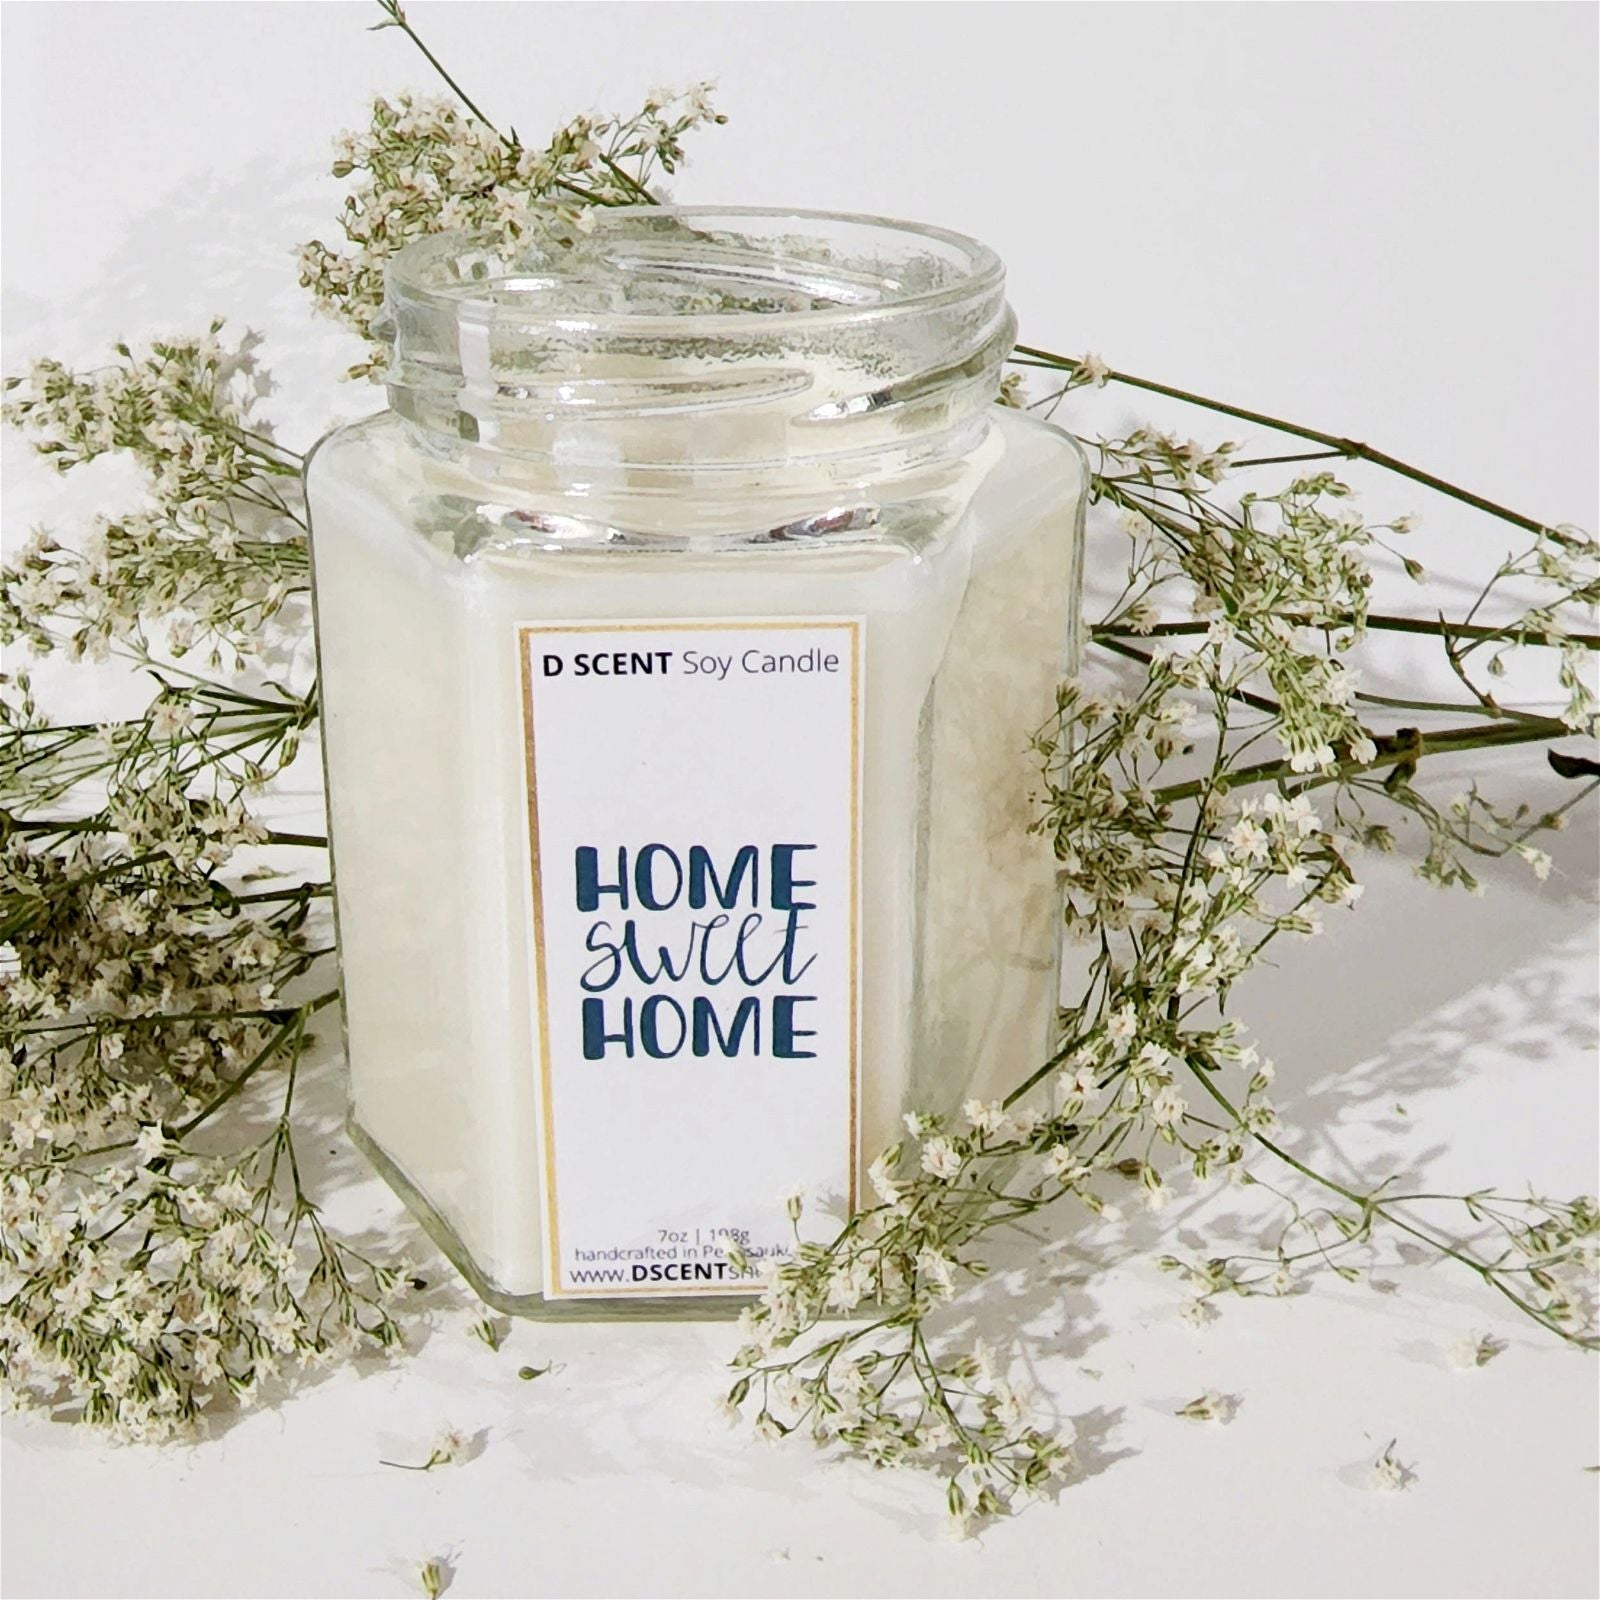 HOME sweet HOME Soy Candle | Large Hex Jar - D SCENT 